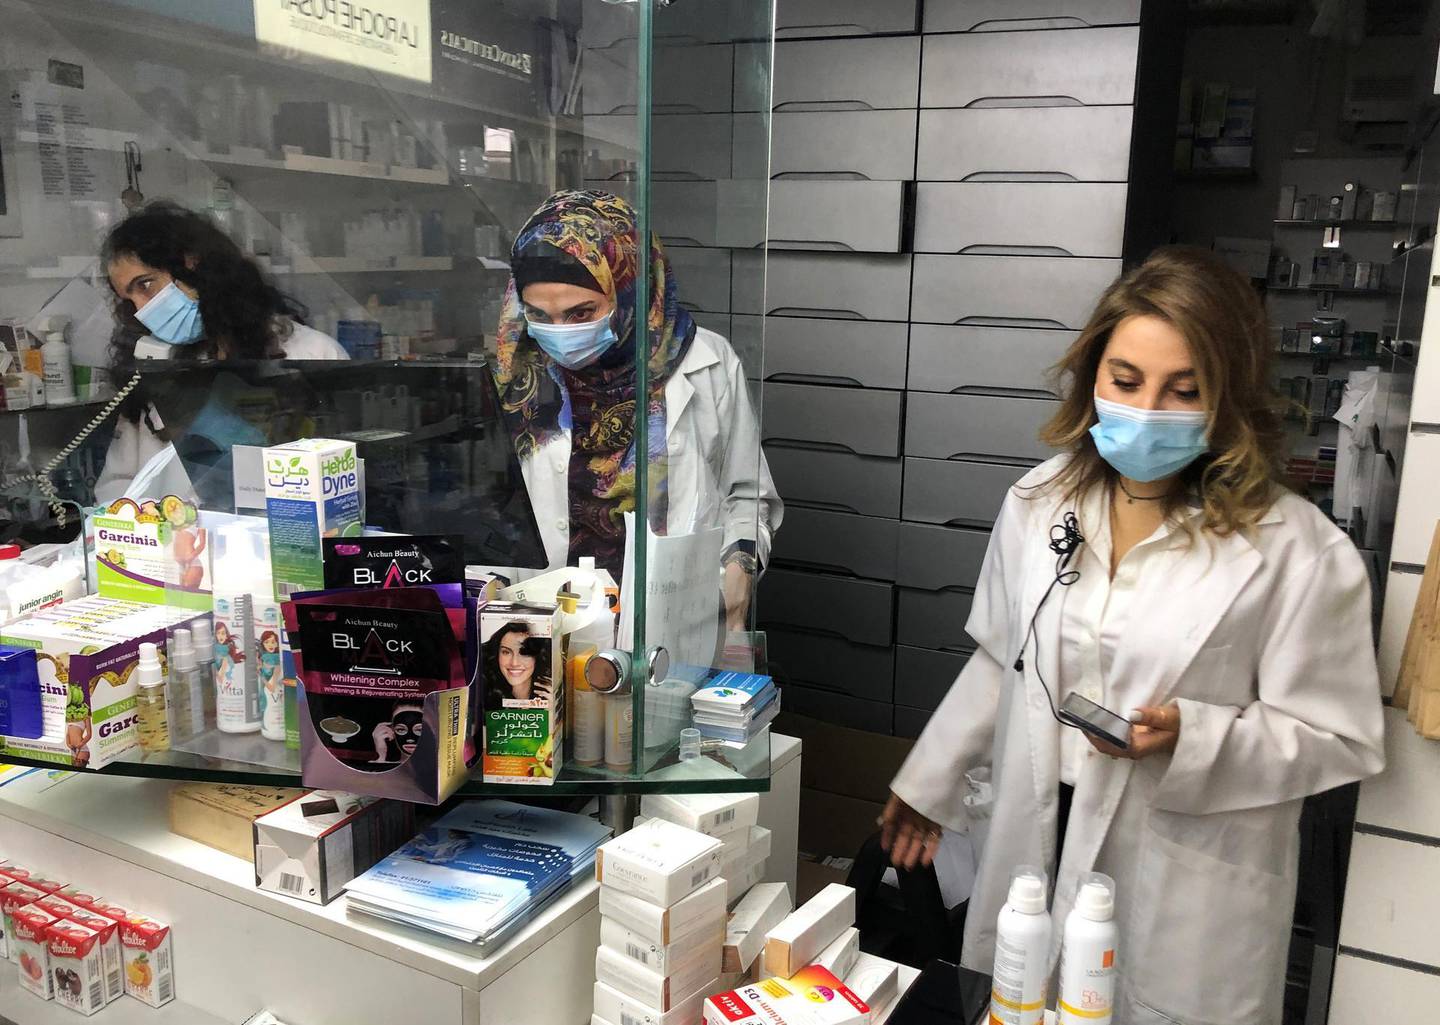 Pharmacist Siham Itani wearing a protective mask looks at her mobile phone inside her pharmacy in Beirut, Lebanon October 6, 2020. Picture taken October 6, 2020. REUTERS/Issam Abdallah